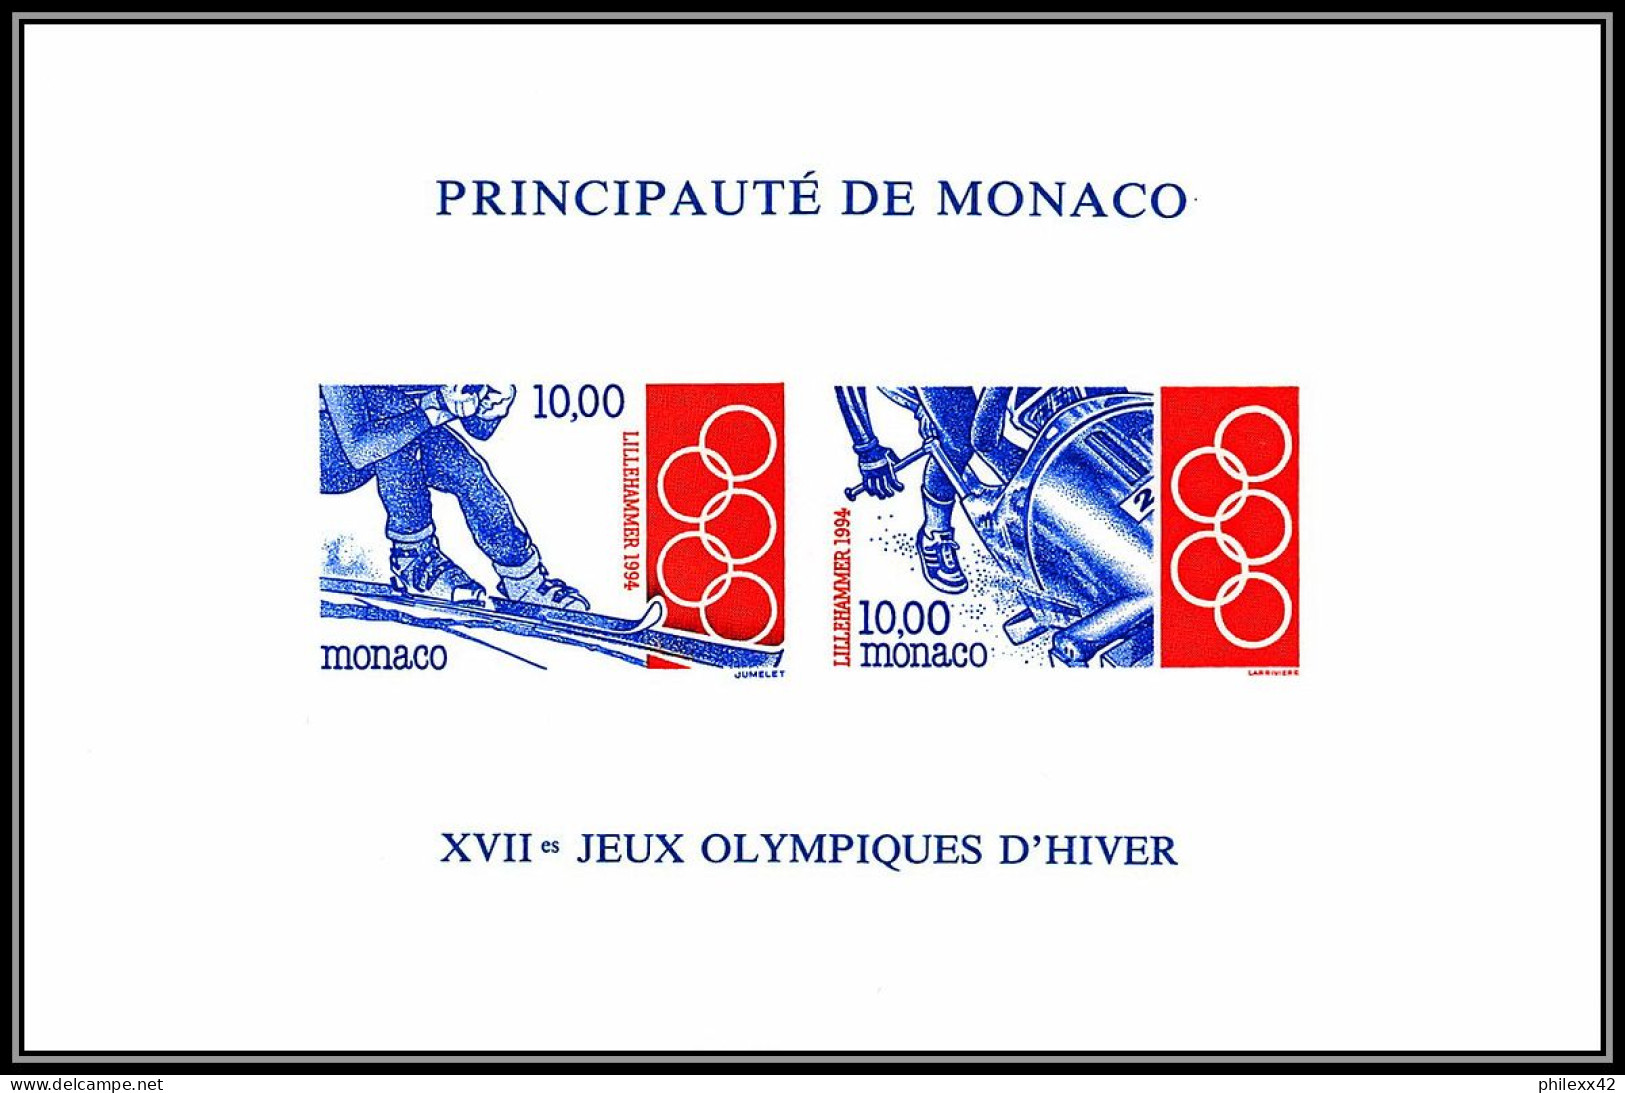 85264 Bloc Collectif BF N°63 Lillehammer 1994 Jeux Olympiques (olympic Games) Monaco Non Dentelé ** MNH Imperf - Inverno1994: Lillehammer